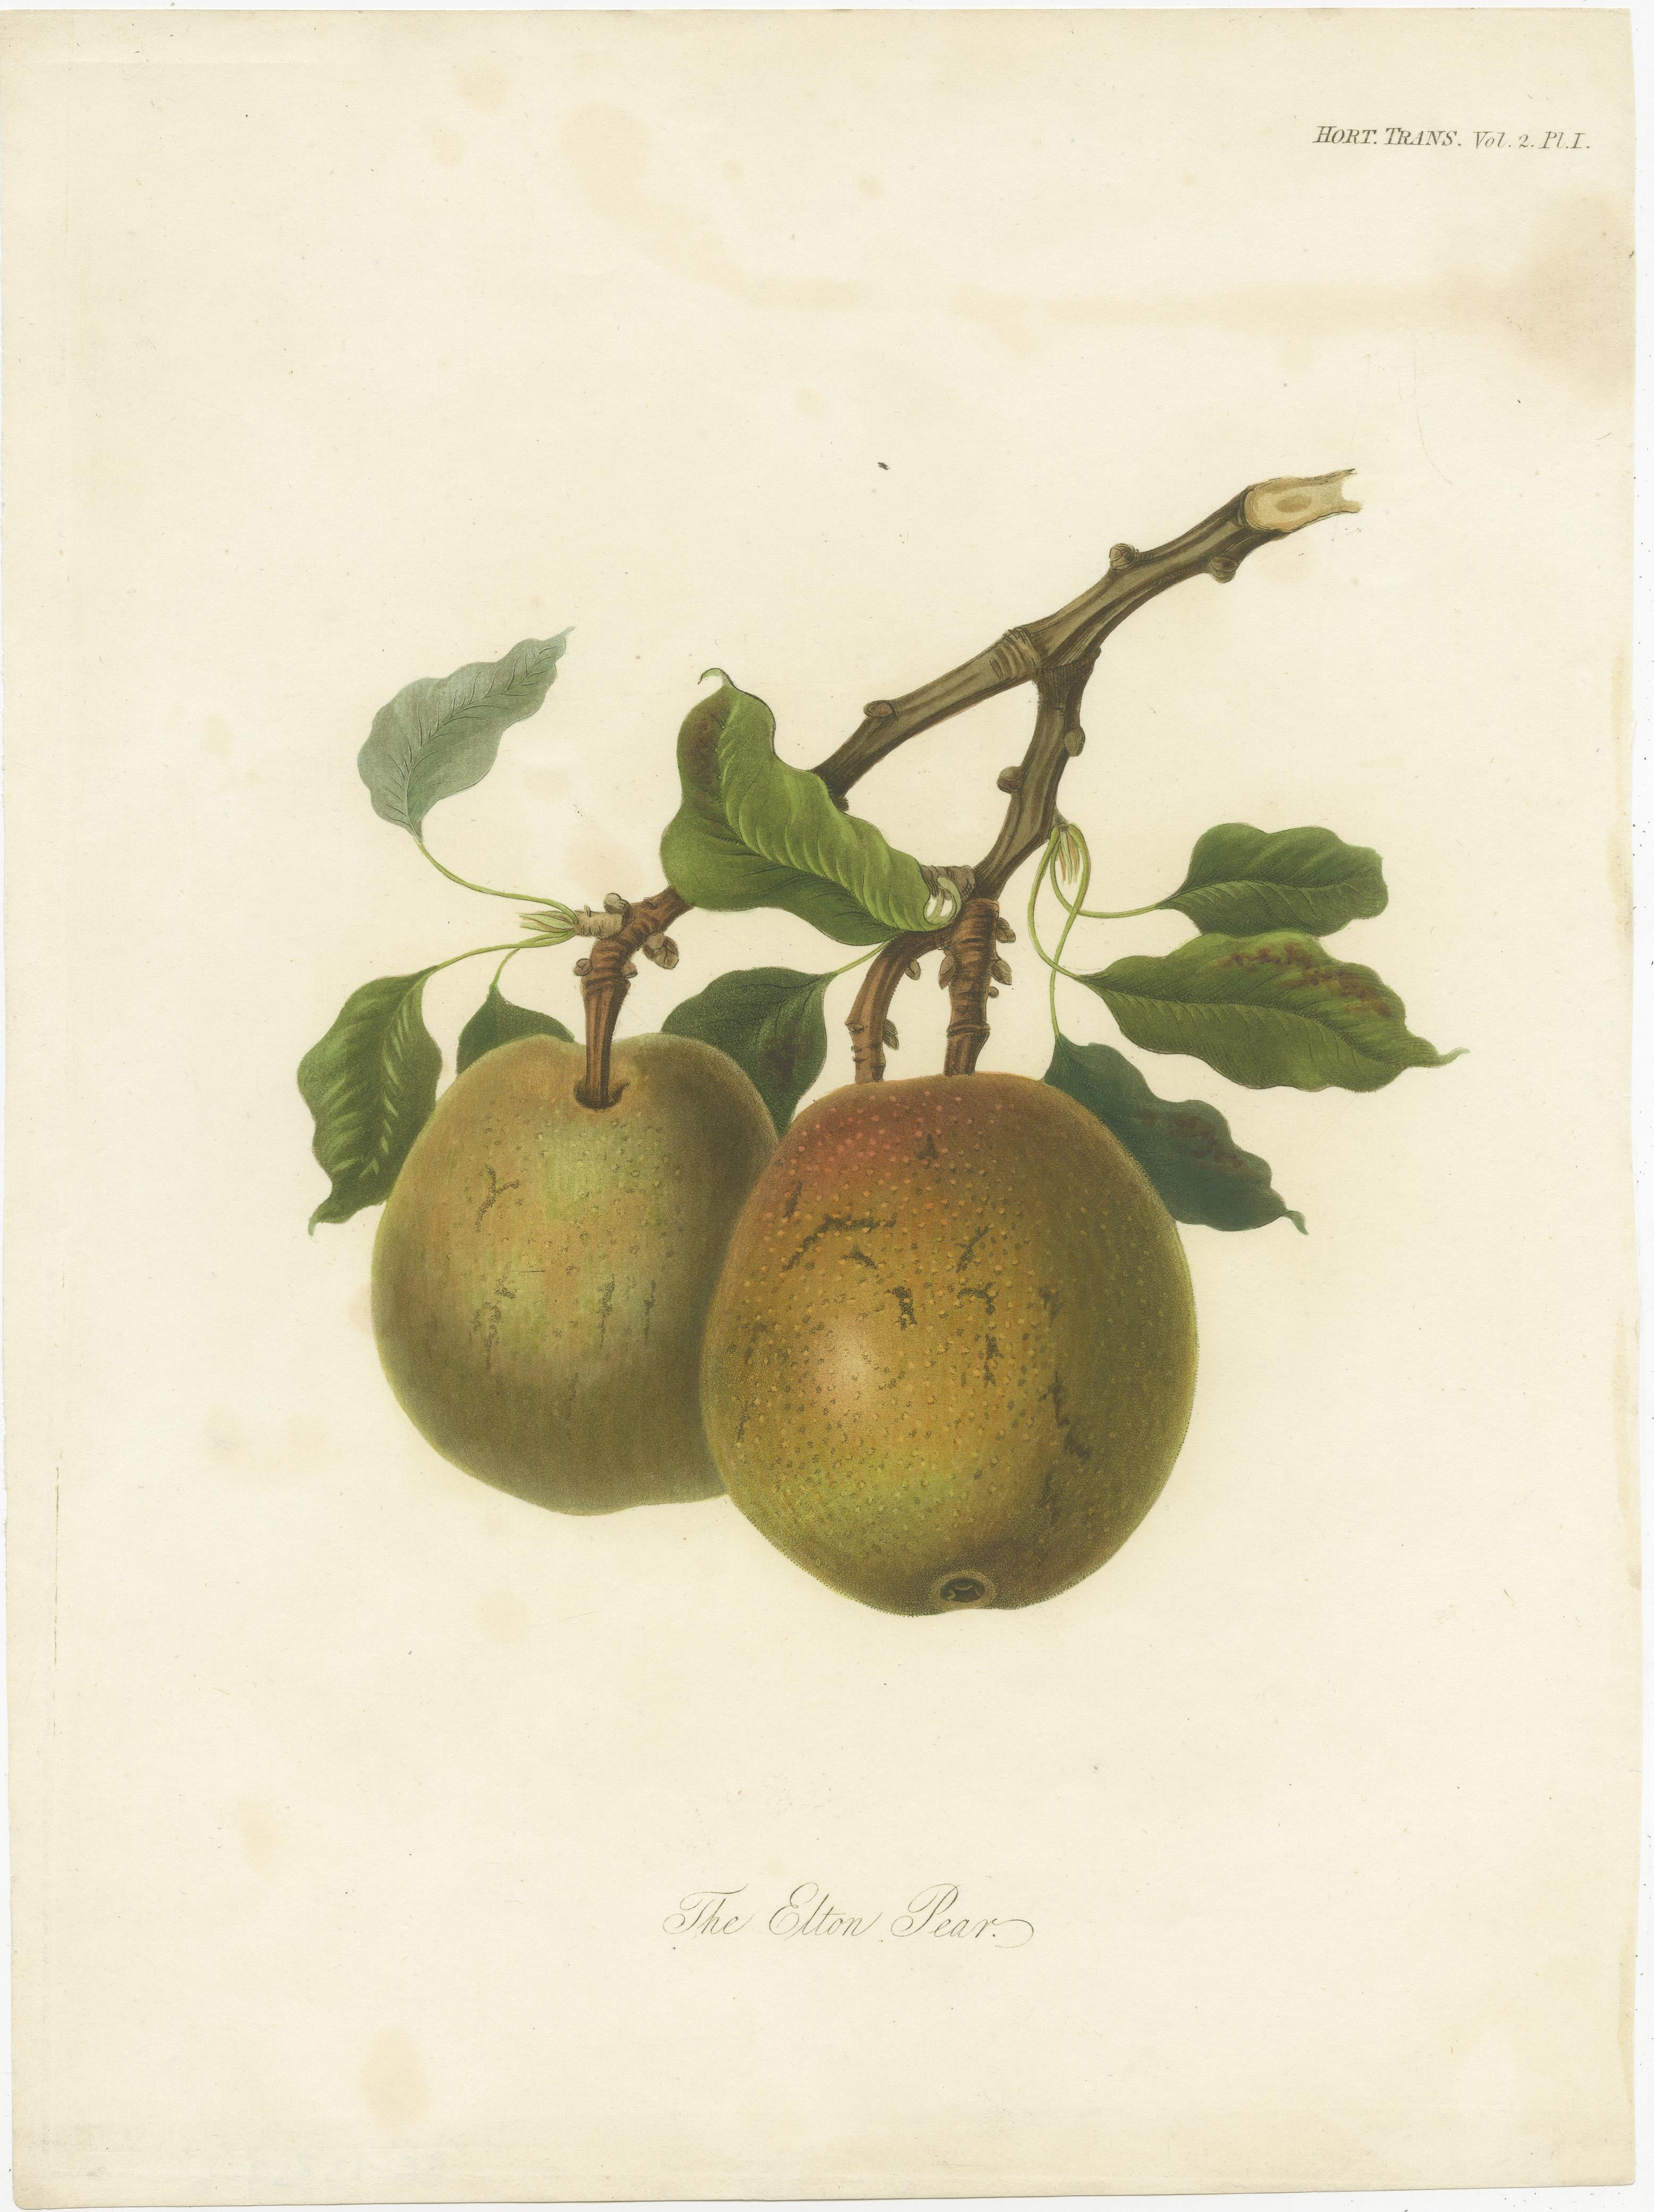 Antique print titled 'The Elton Pear'. This print originates from 'Transactions of the Horticultural Society of London' published circa 1835.

In Transactions of the Horticultural Society of London we find some of the most beautifully illustrated